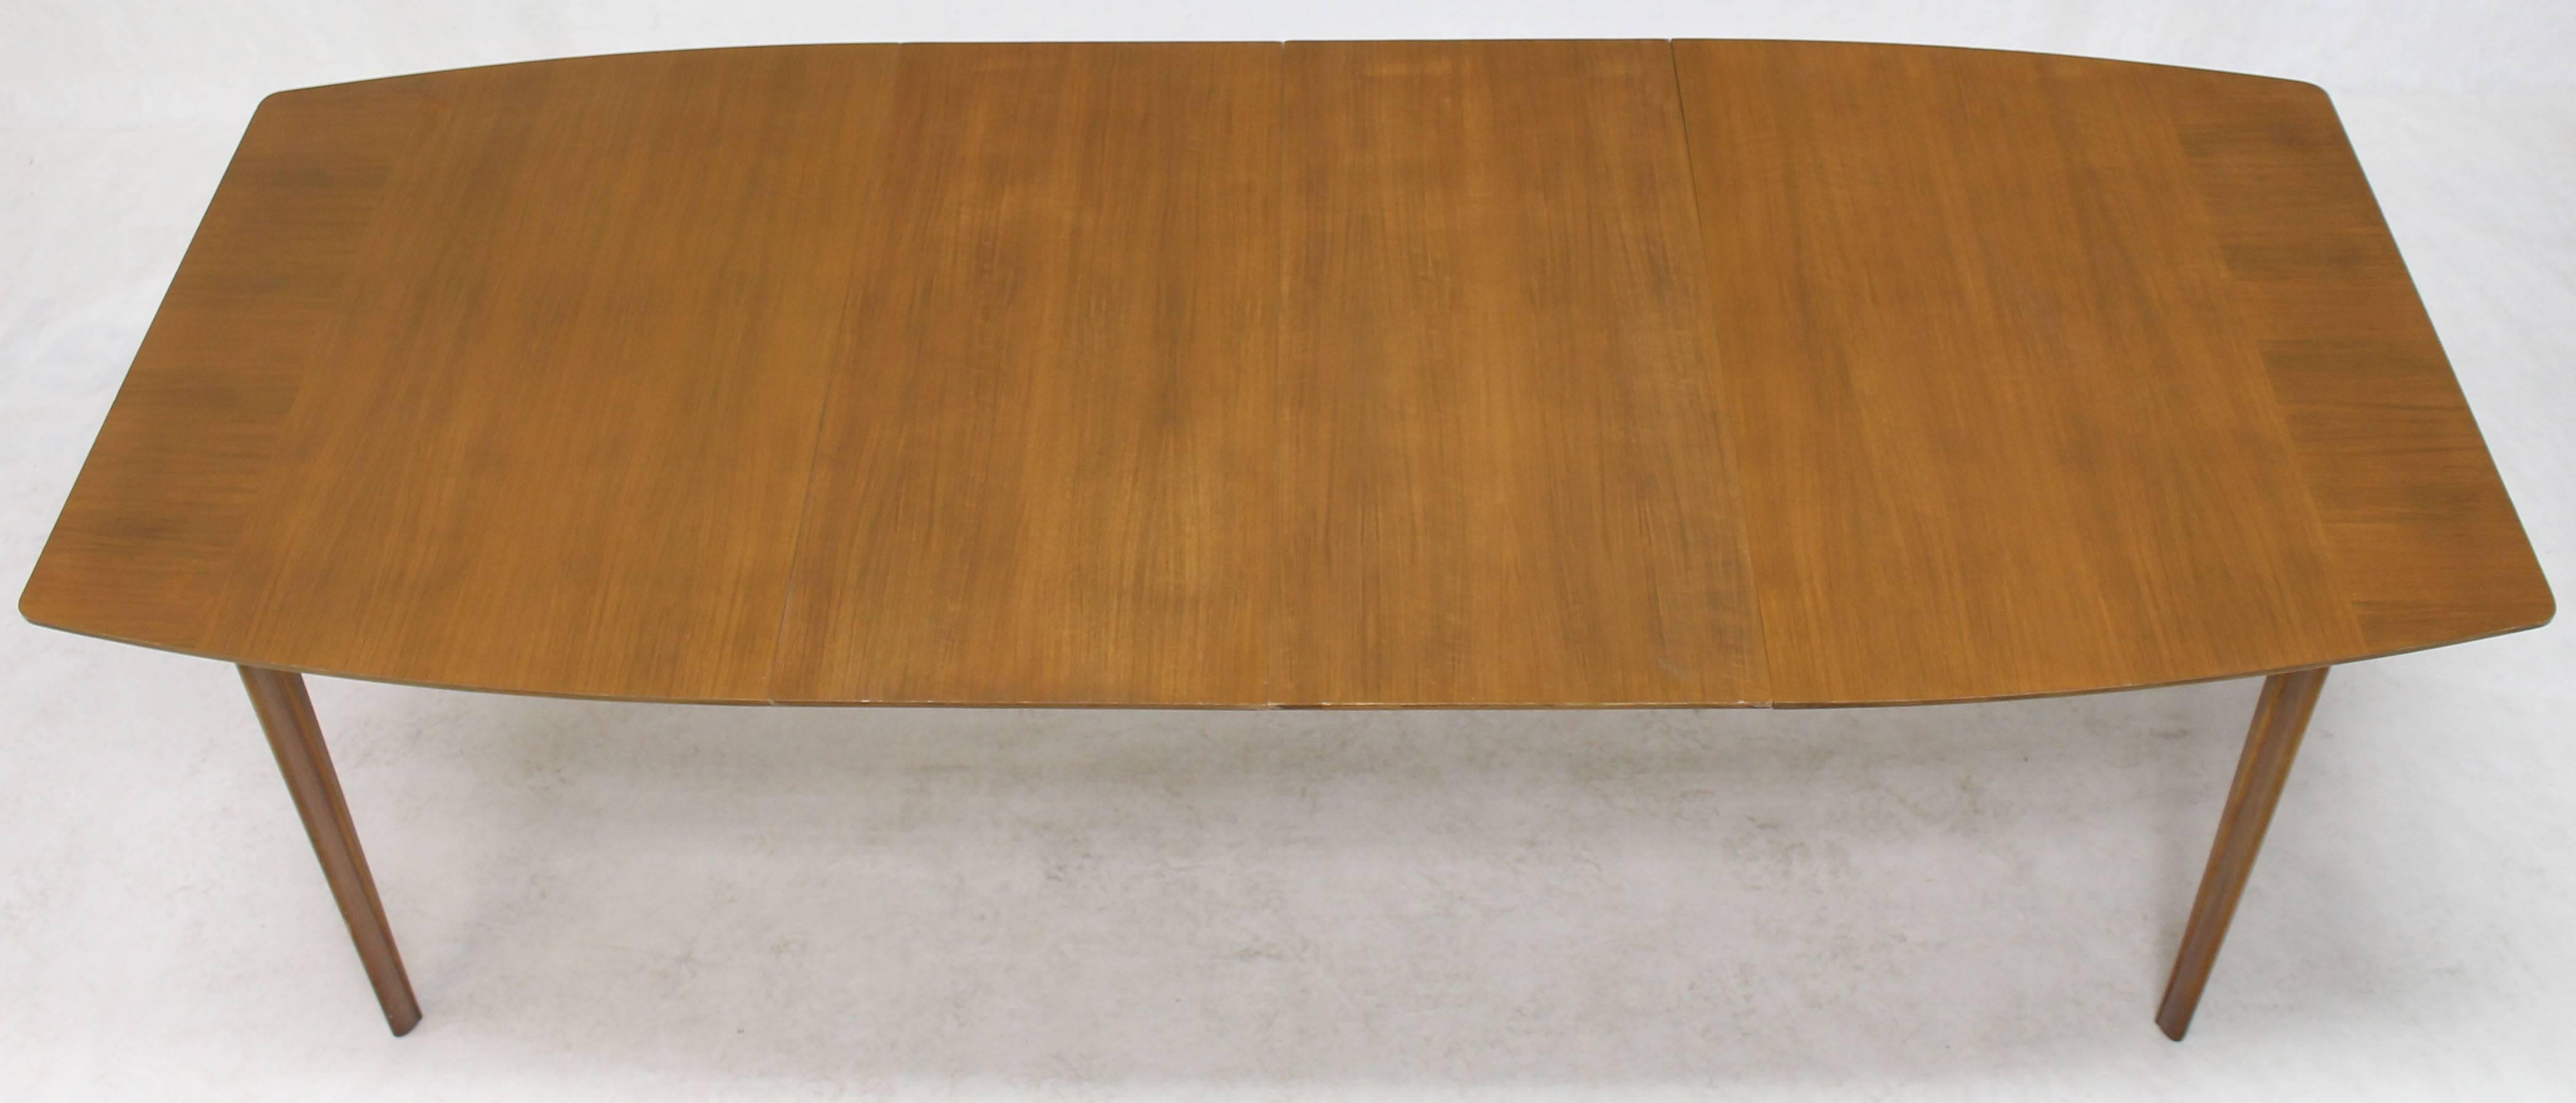 Widdicomb Walnut Dining Table w/ Two Extension Boards Leaves Gibbings era In Excellent Condition For Sale In Rockaway, NJ